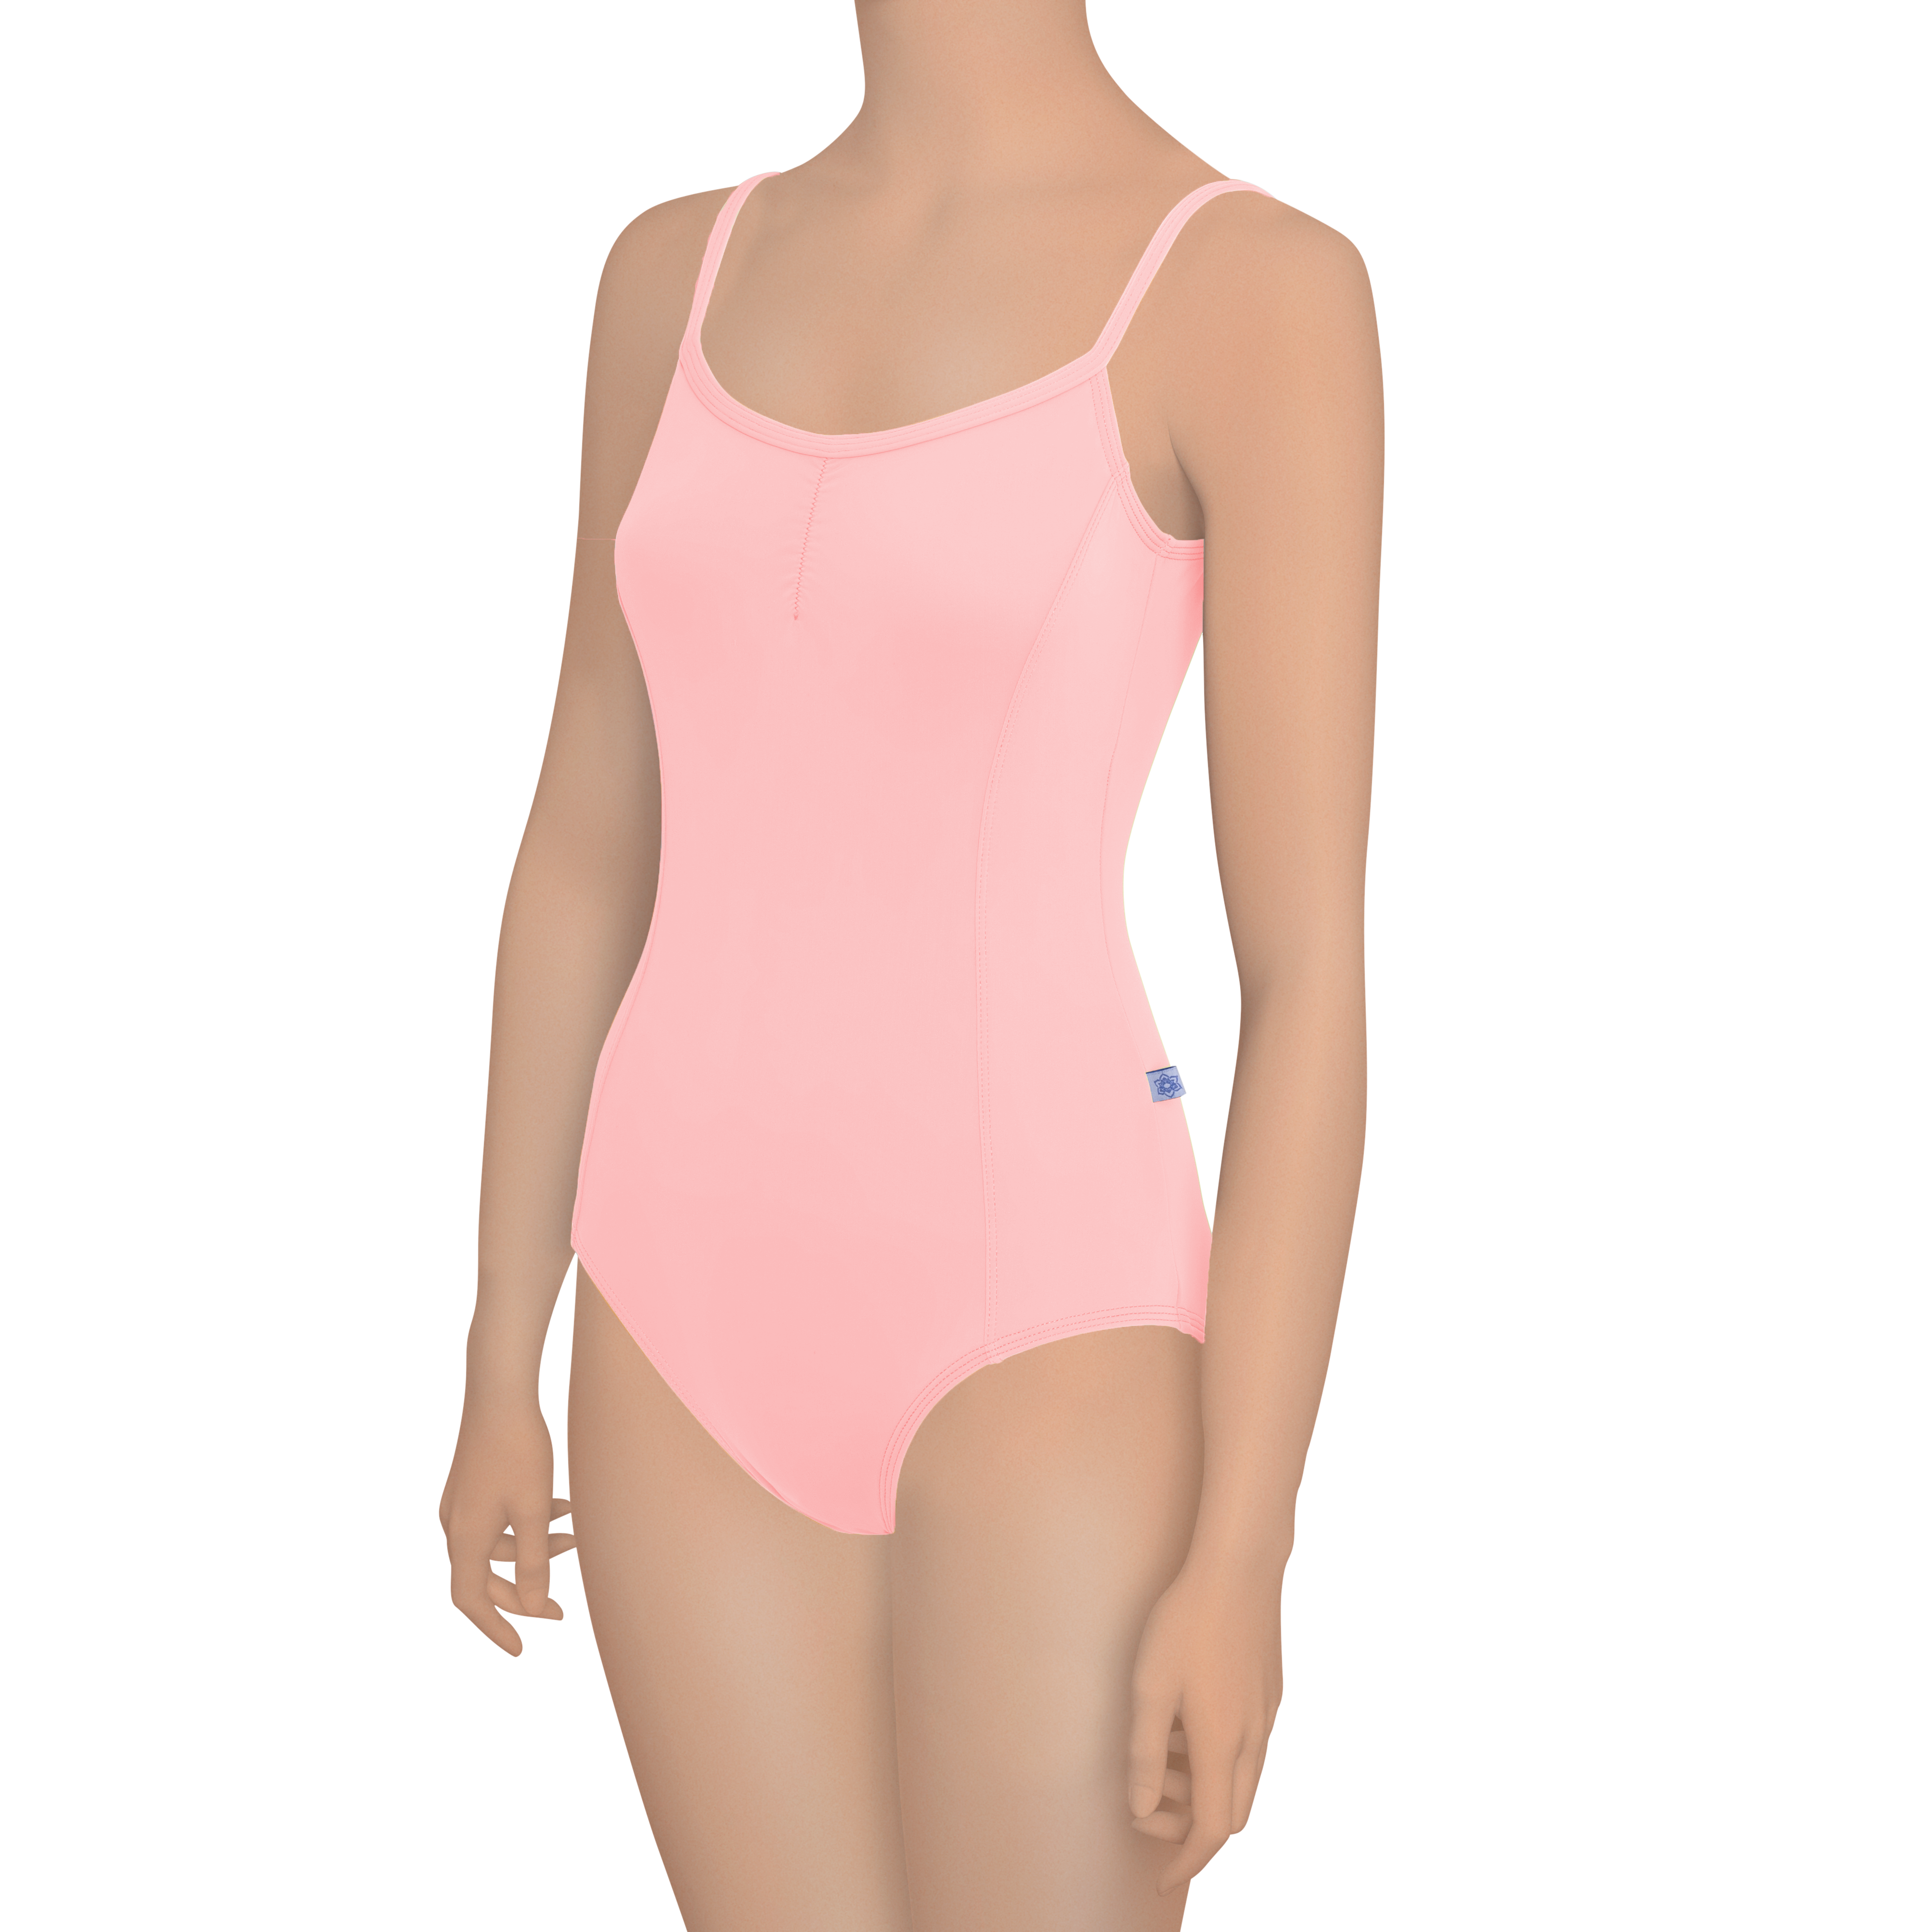 Teen Jersey 2pc Camisole with Support - Tan – Petit Clair